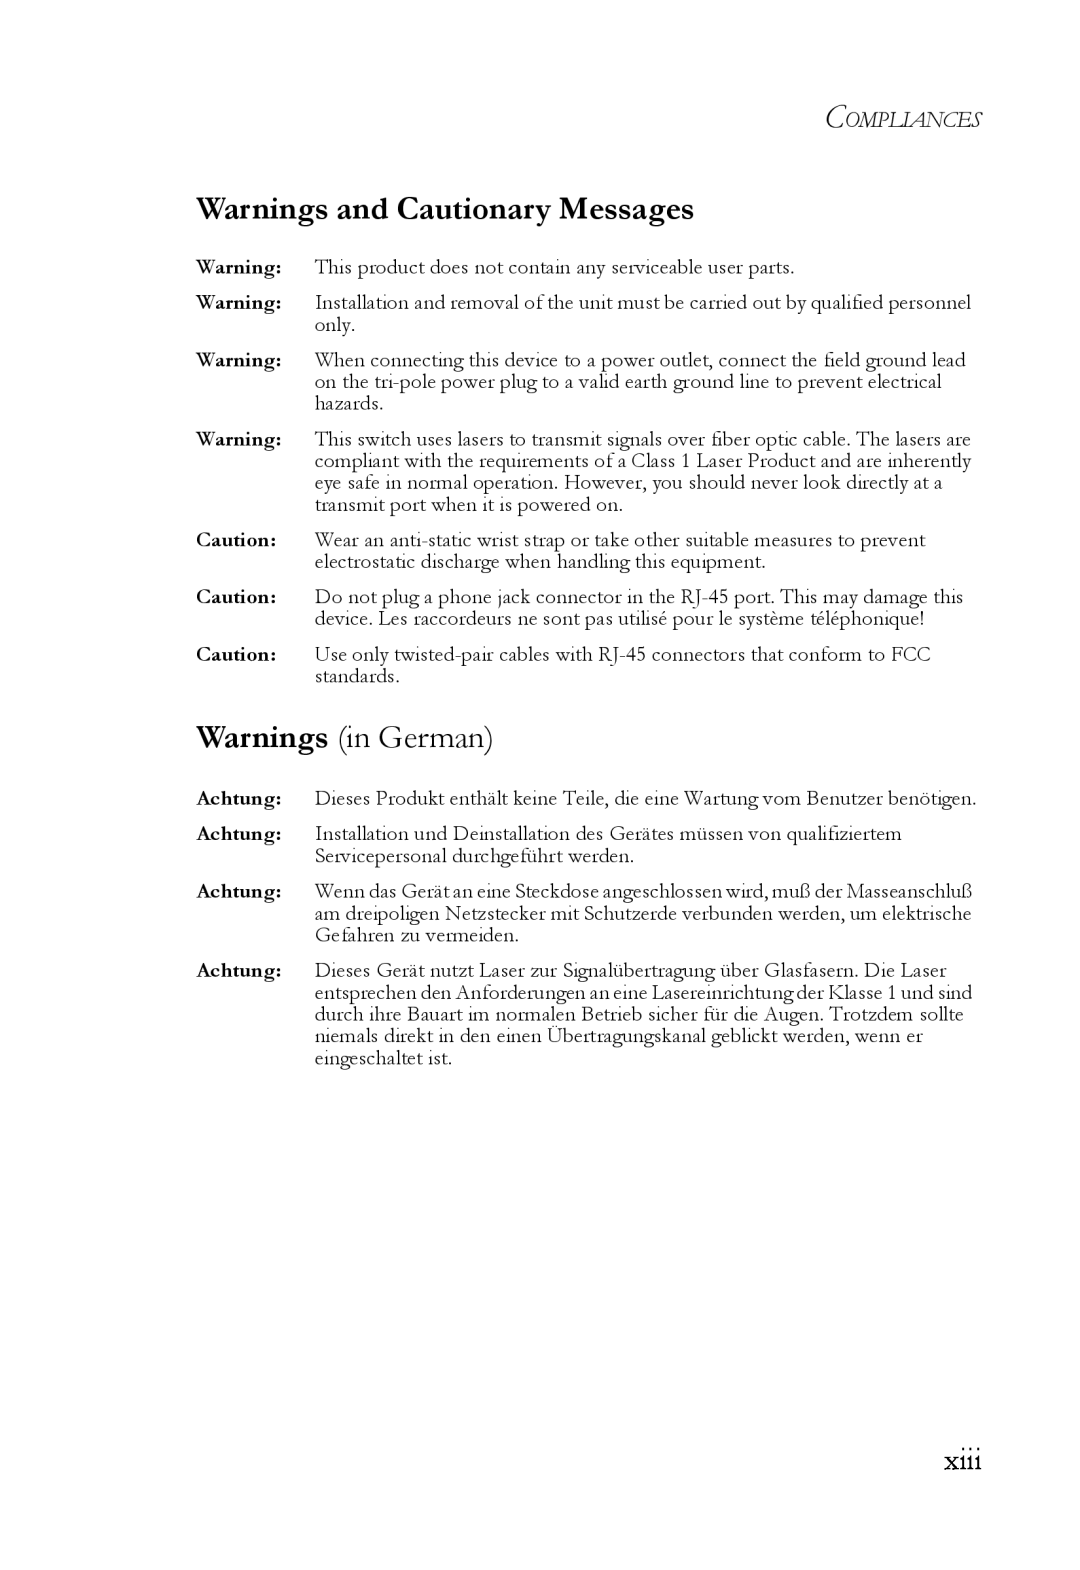 SMC Networks SMC7824M/FSW manual Warnings and Cautionary Messages, Warnings in German, xiii, Compliances 